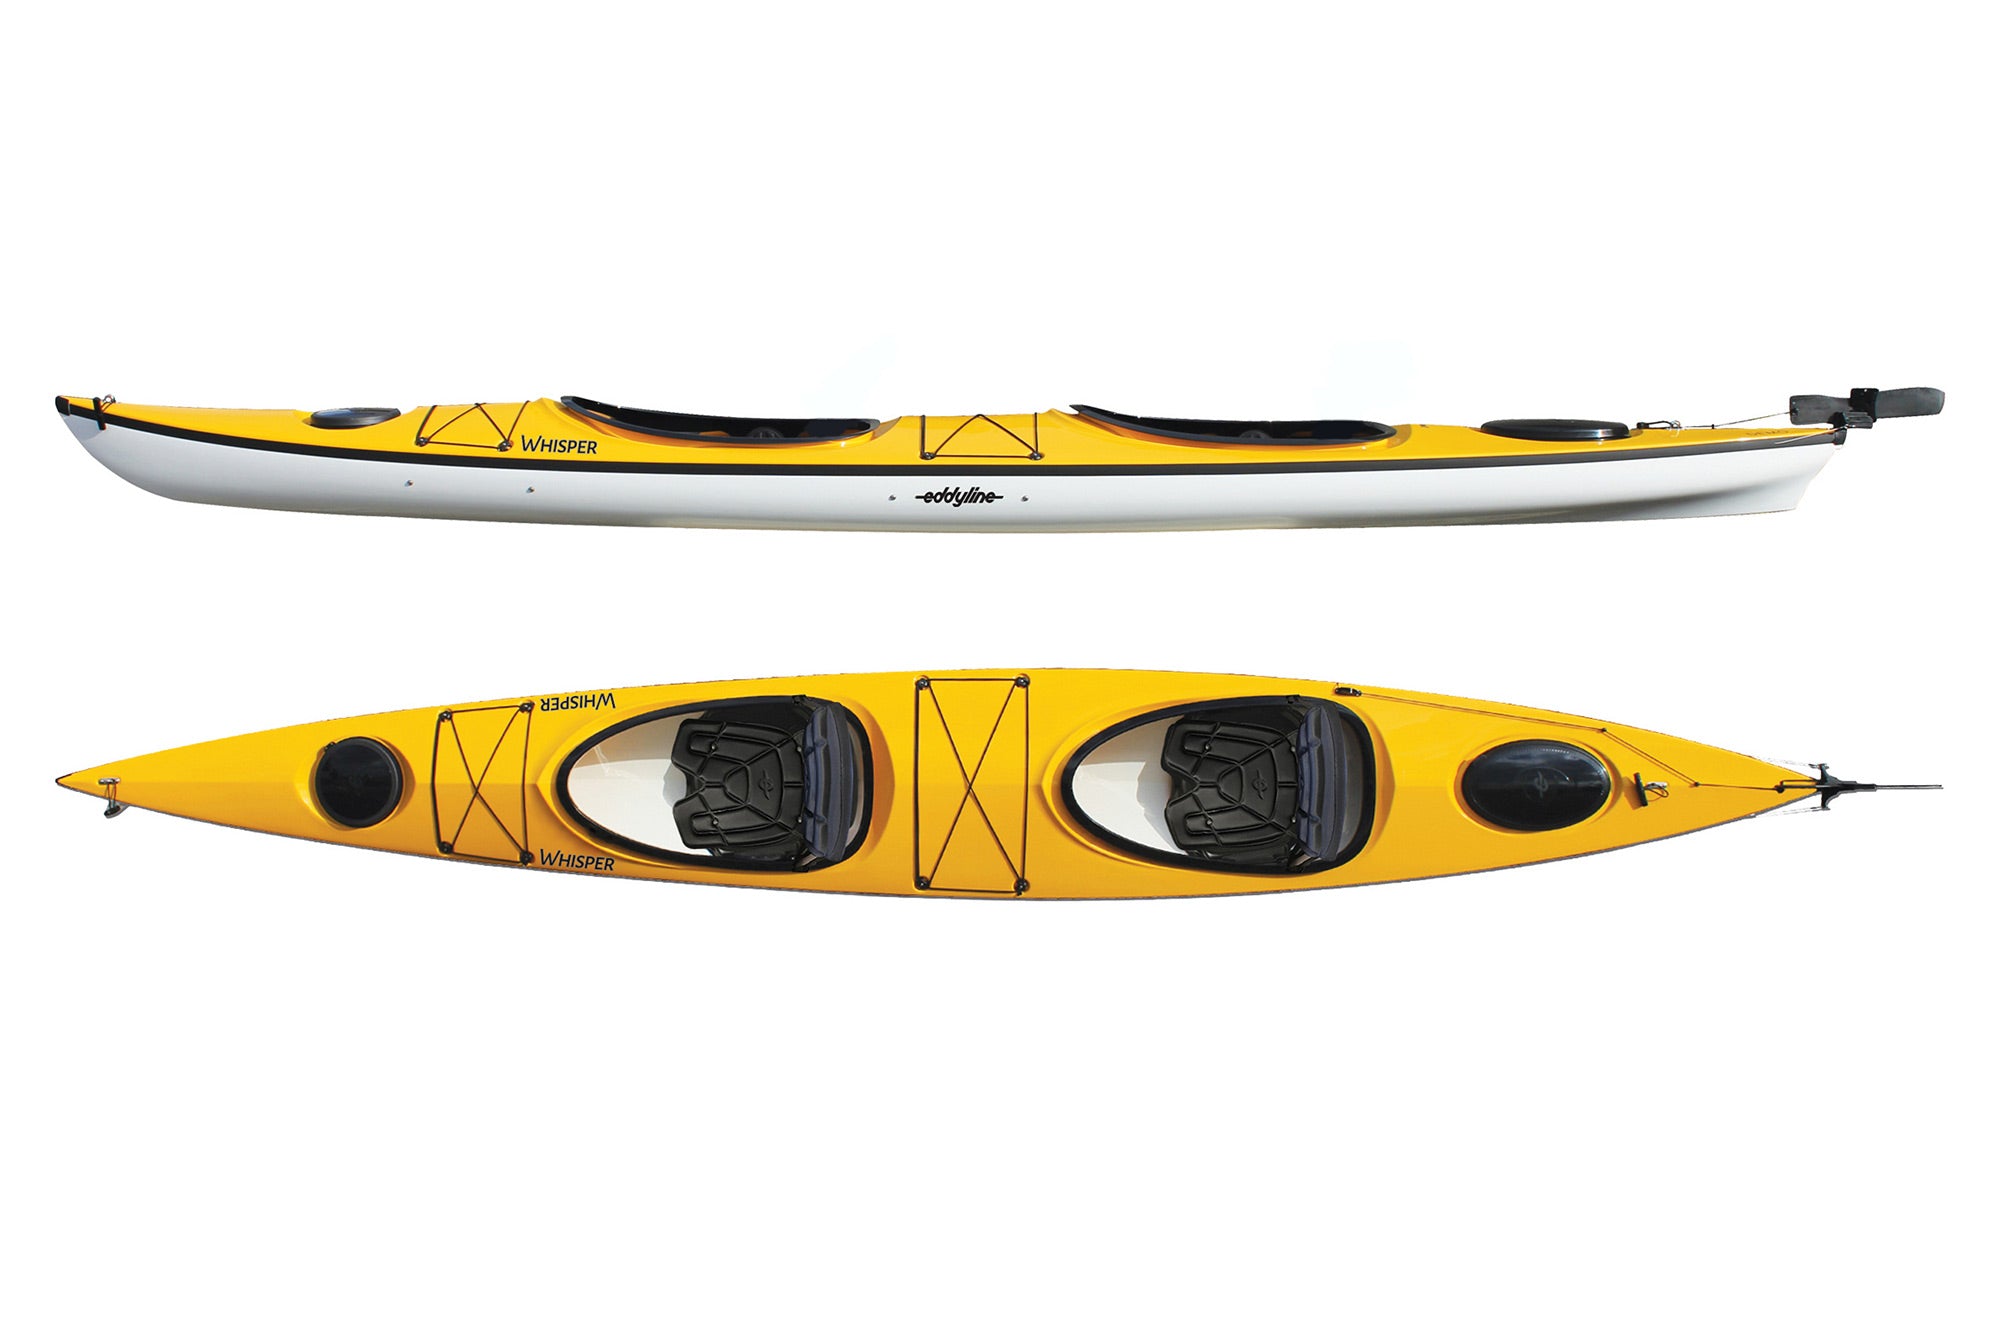 Sea Swift Touring Paddle - All Carbon Reviews - Eddyline Kayaks